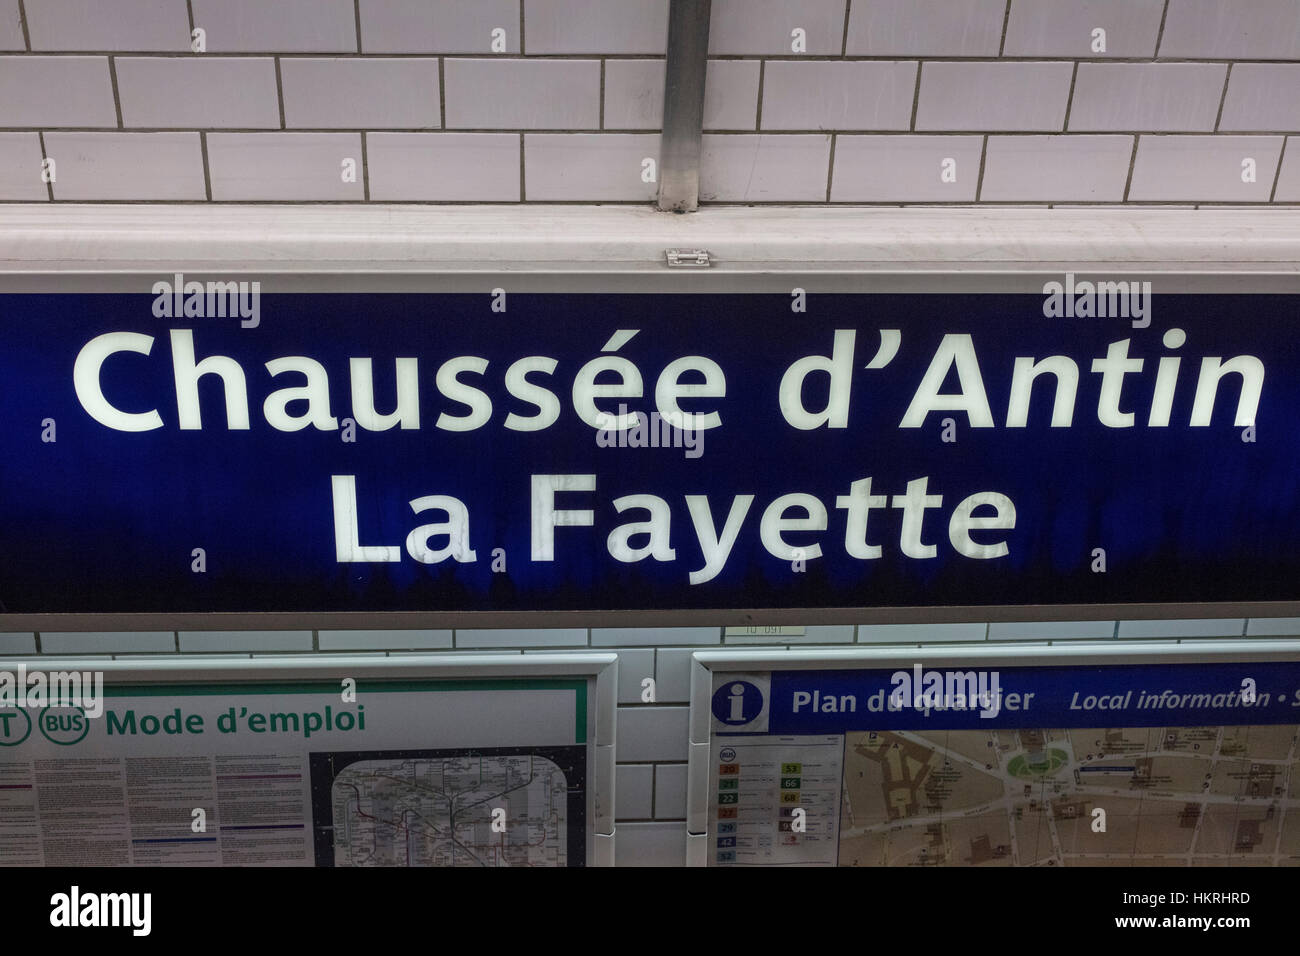 metro sign for Chausee d'Antin La Fayette station, Paris, France Stock Photo